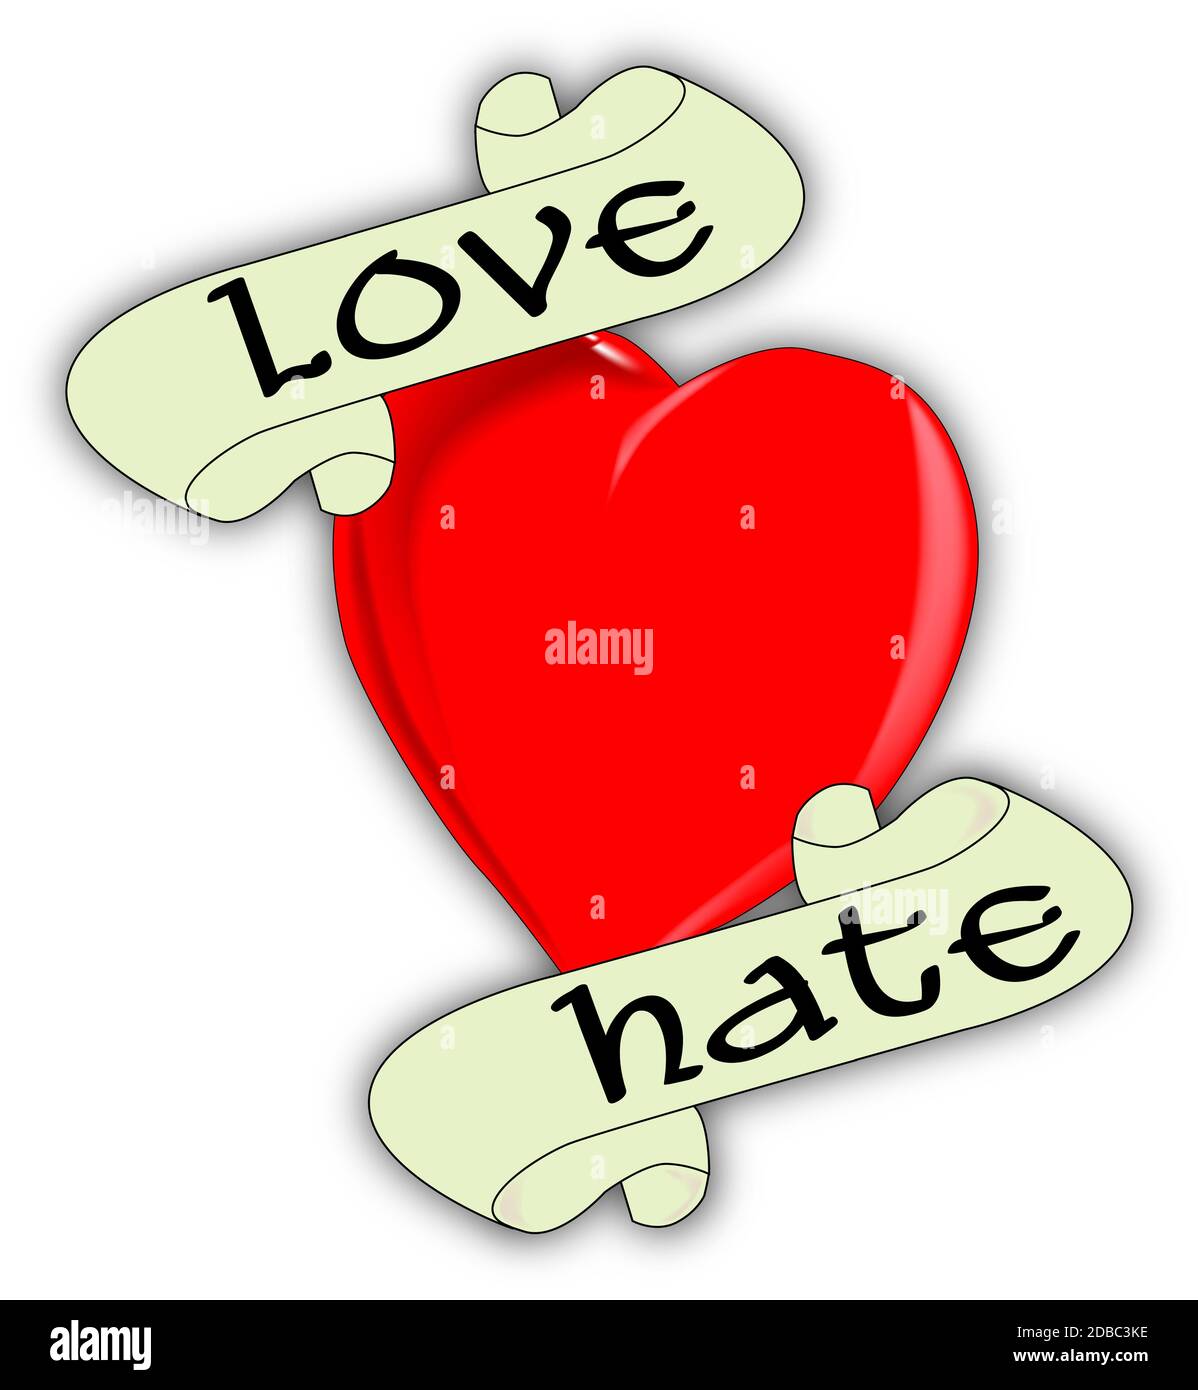 A tattoo style image of the 'Love Hate' logo. Stock Photo